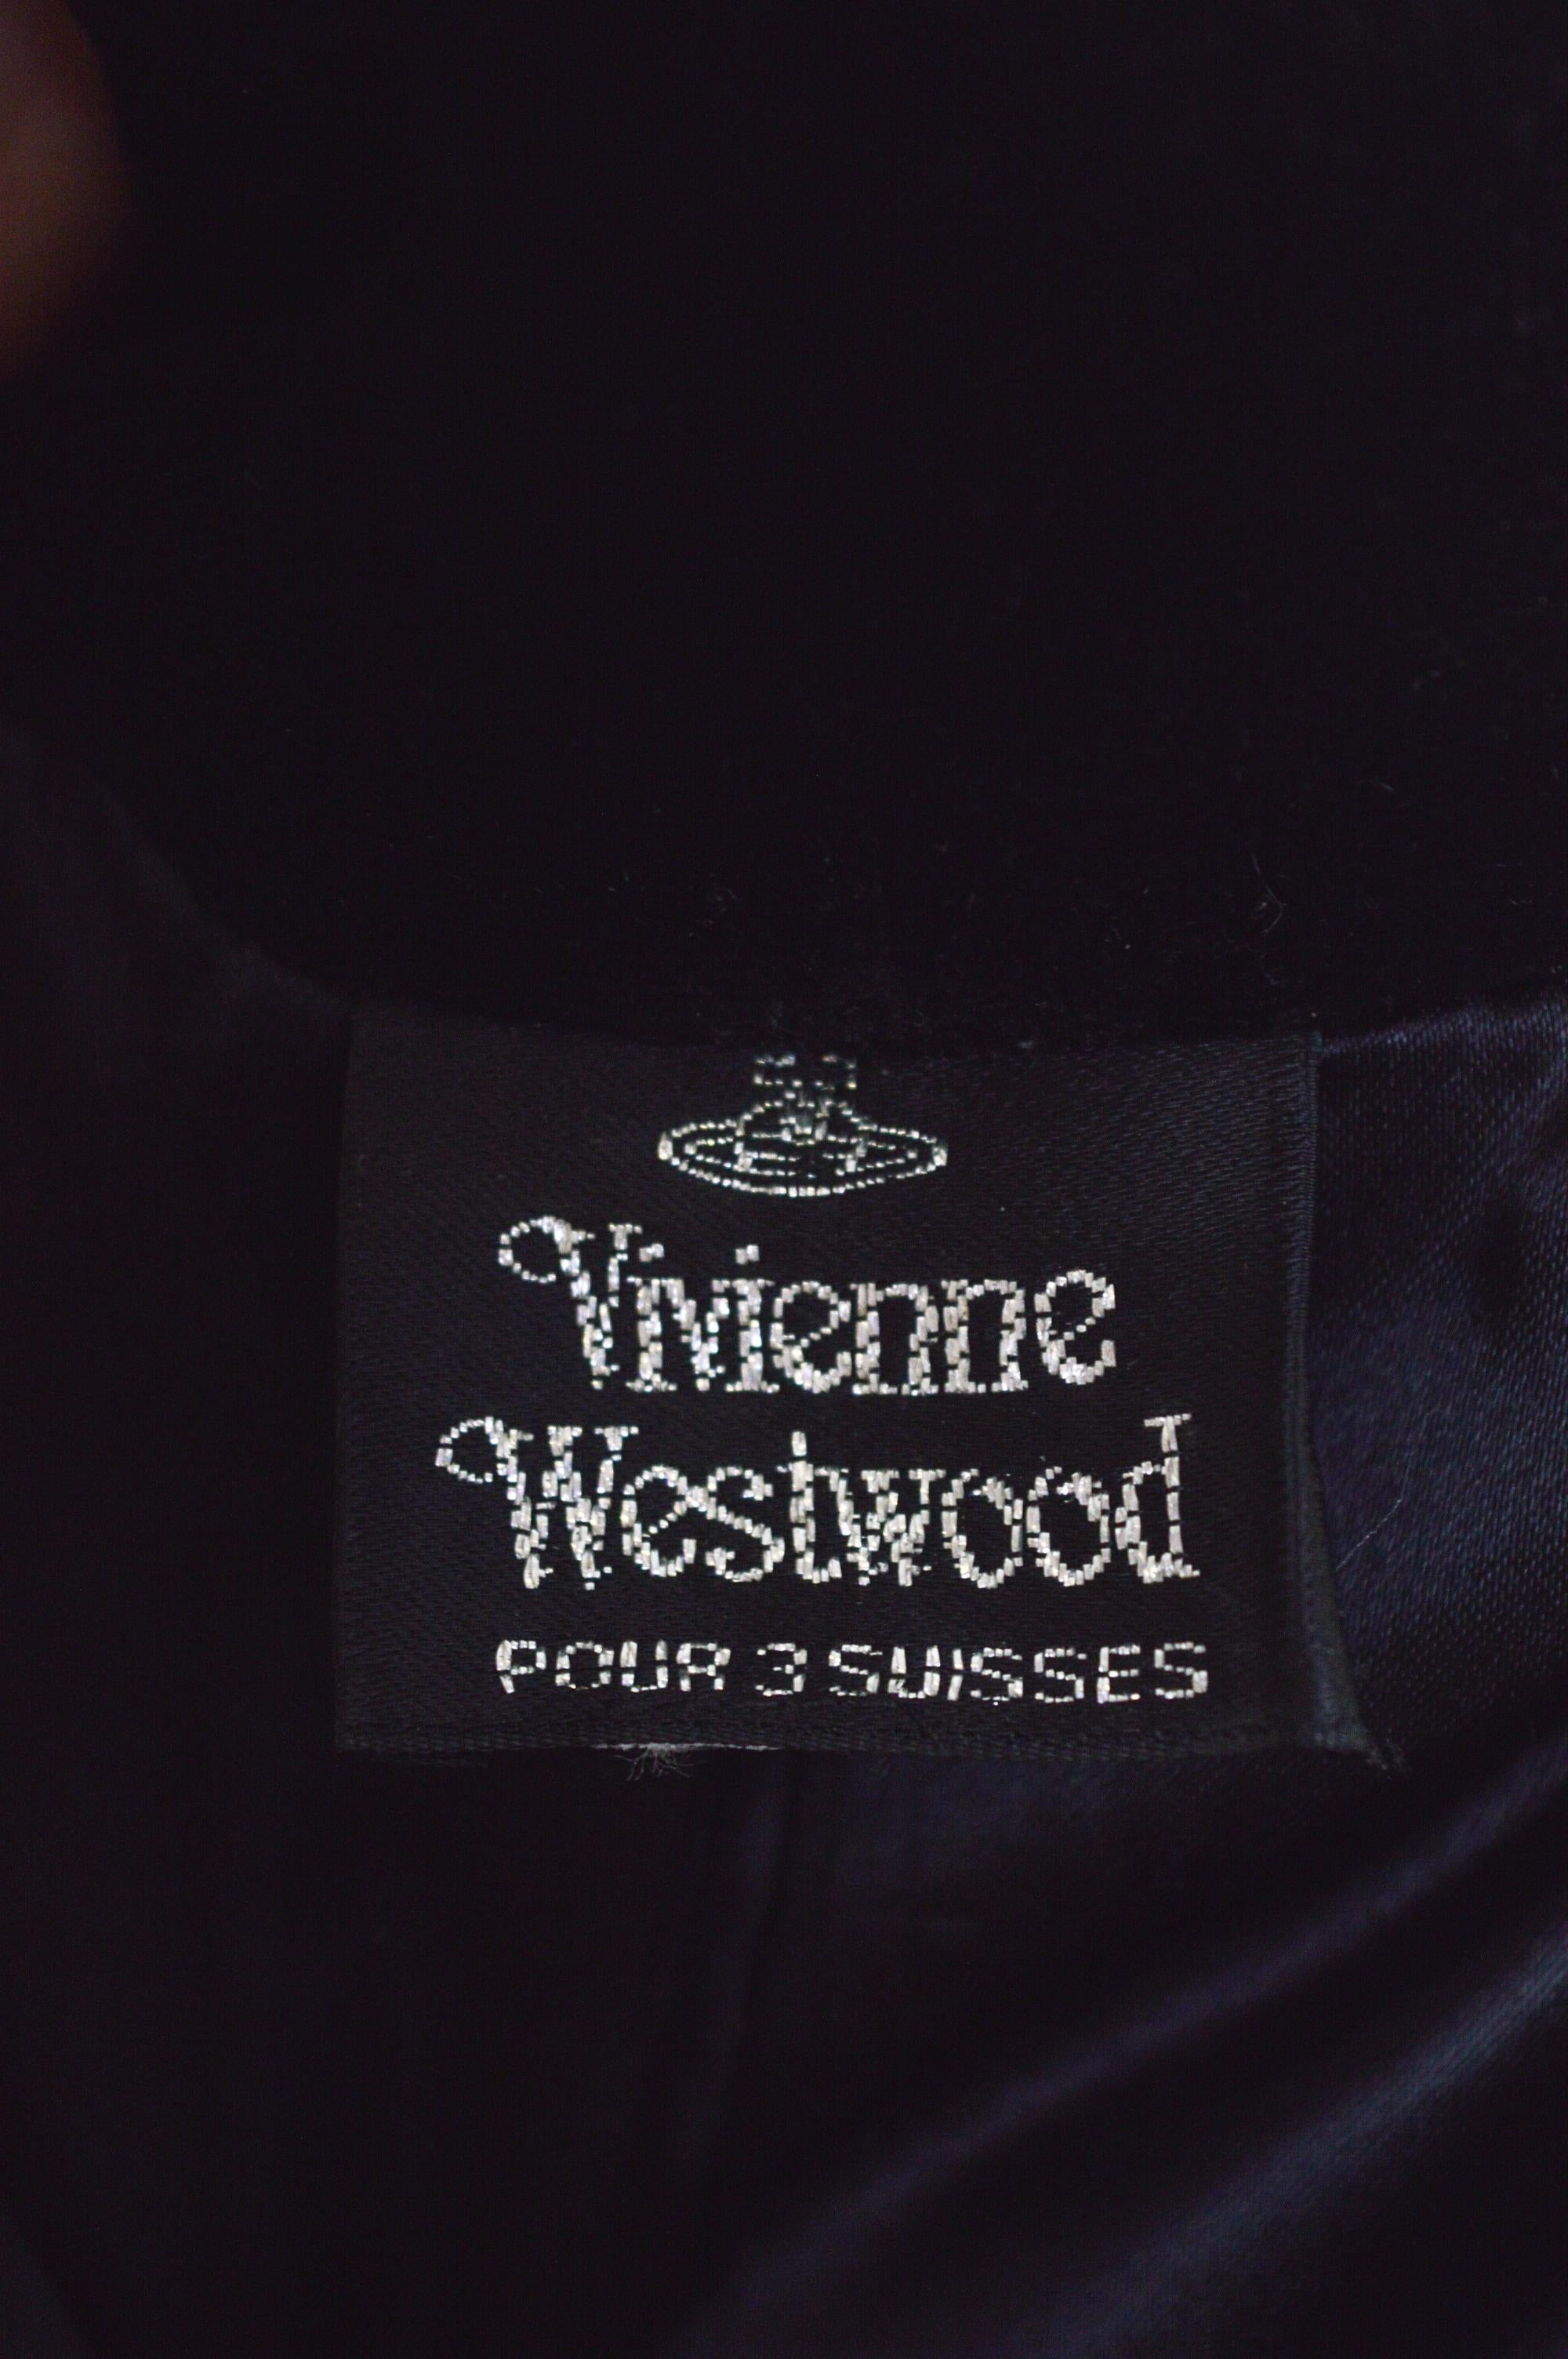 Rare Vivienne Westwood 3 Suisses AW 1995/ 1996 Collab Checked Tartan Wool Coat  For Sale 5